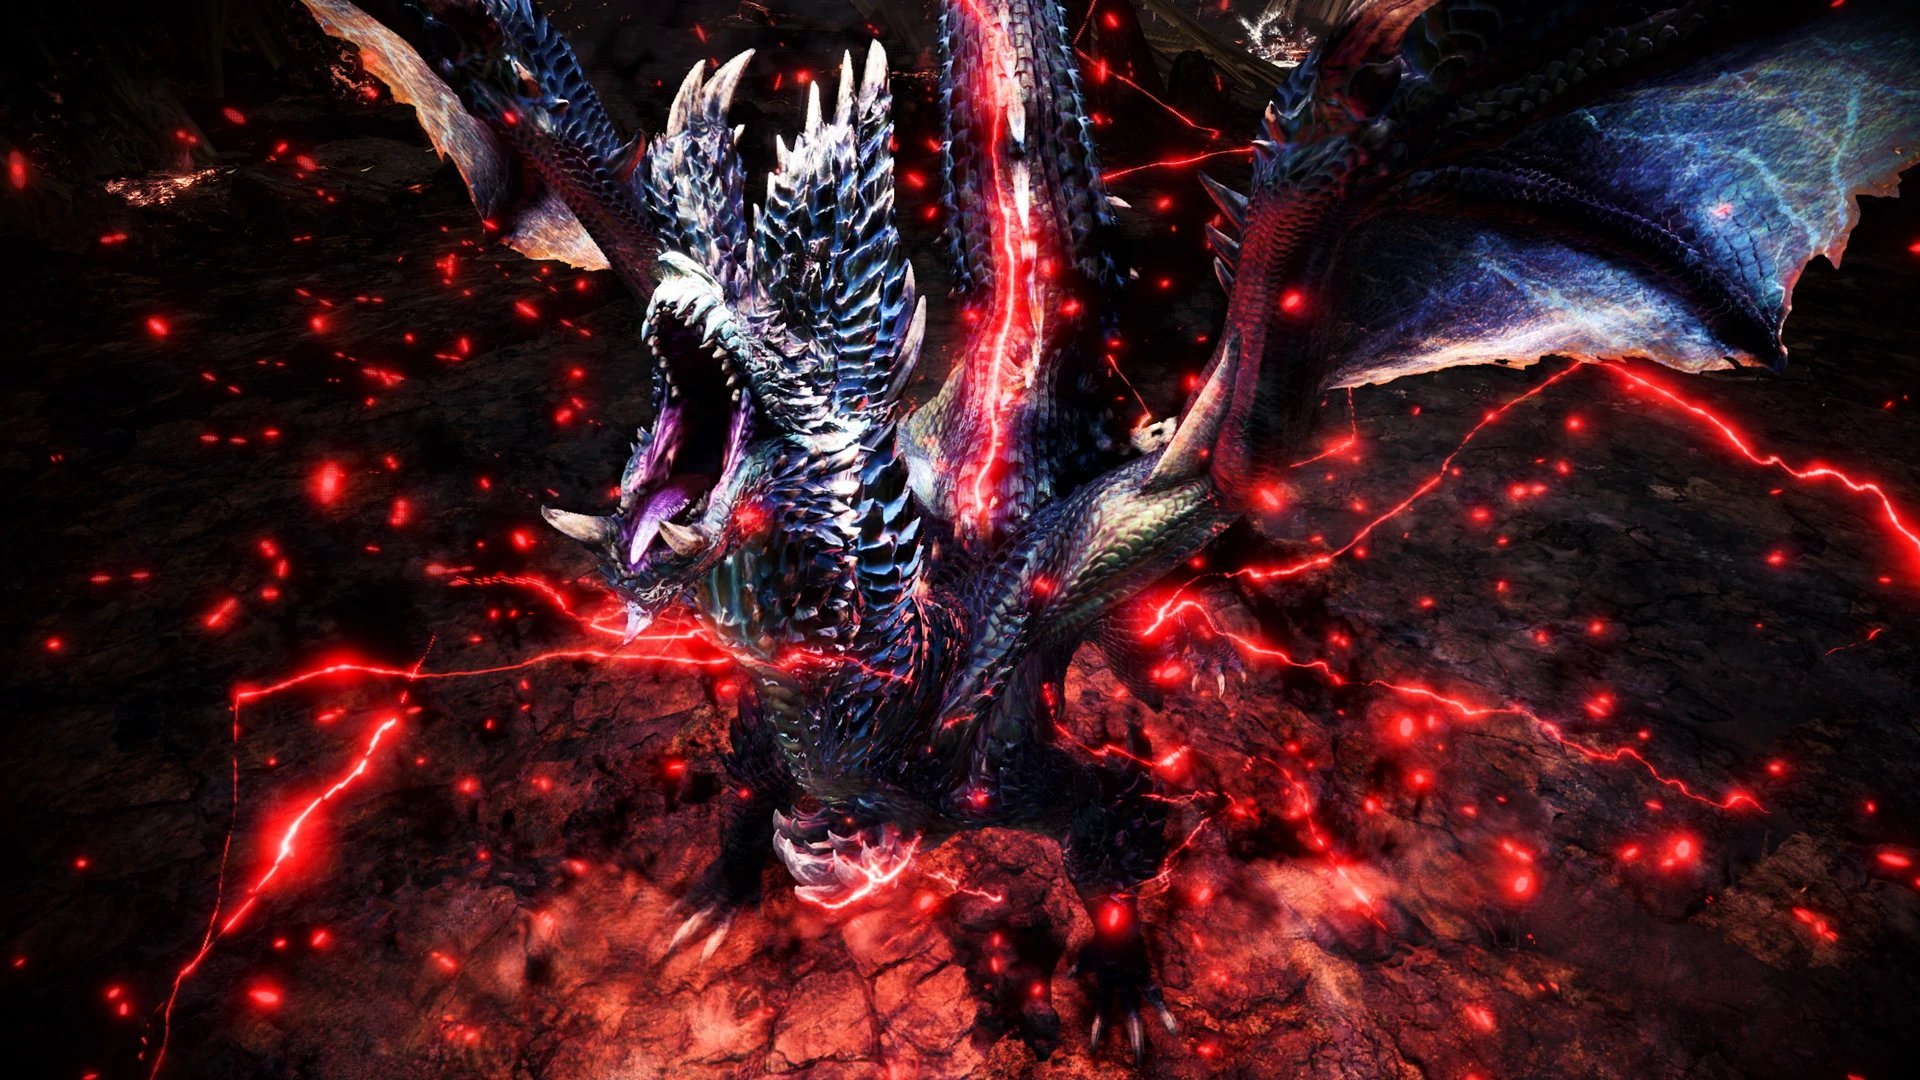 BannedLagiacrus dragon element (龍属性) is a unique element found in the world of Monster Hunter. Although some consider this element to be dark and evil, not much is really